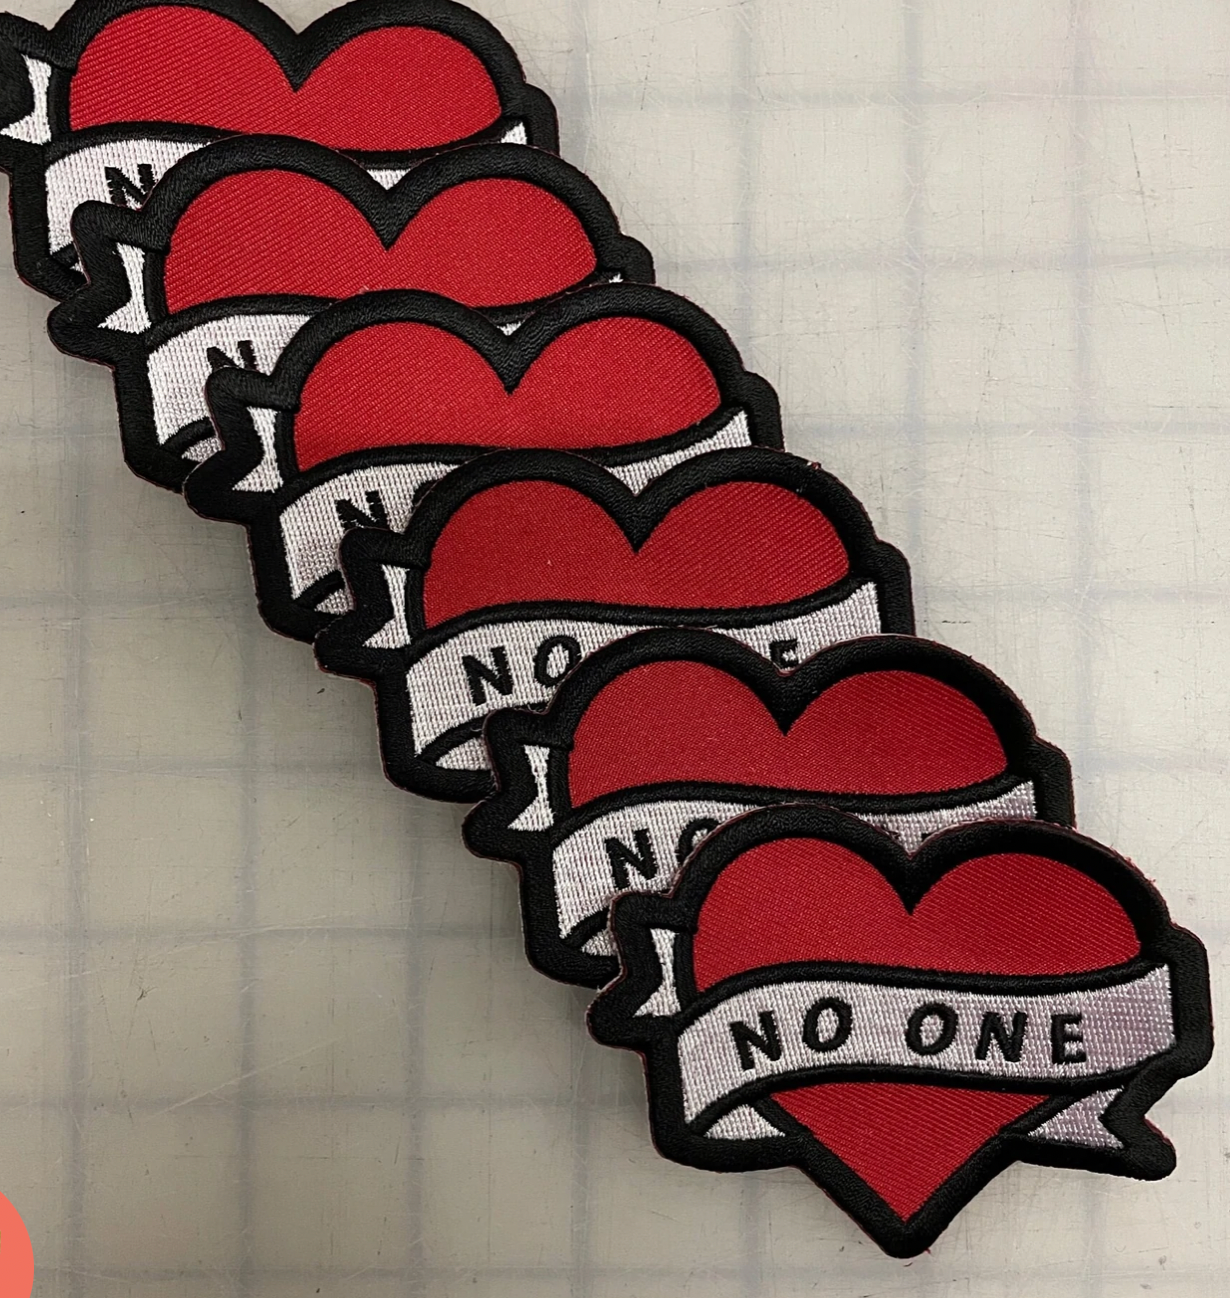 Red heart patch with a white banner across the heart that says "No one" in black letters